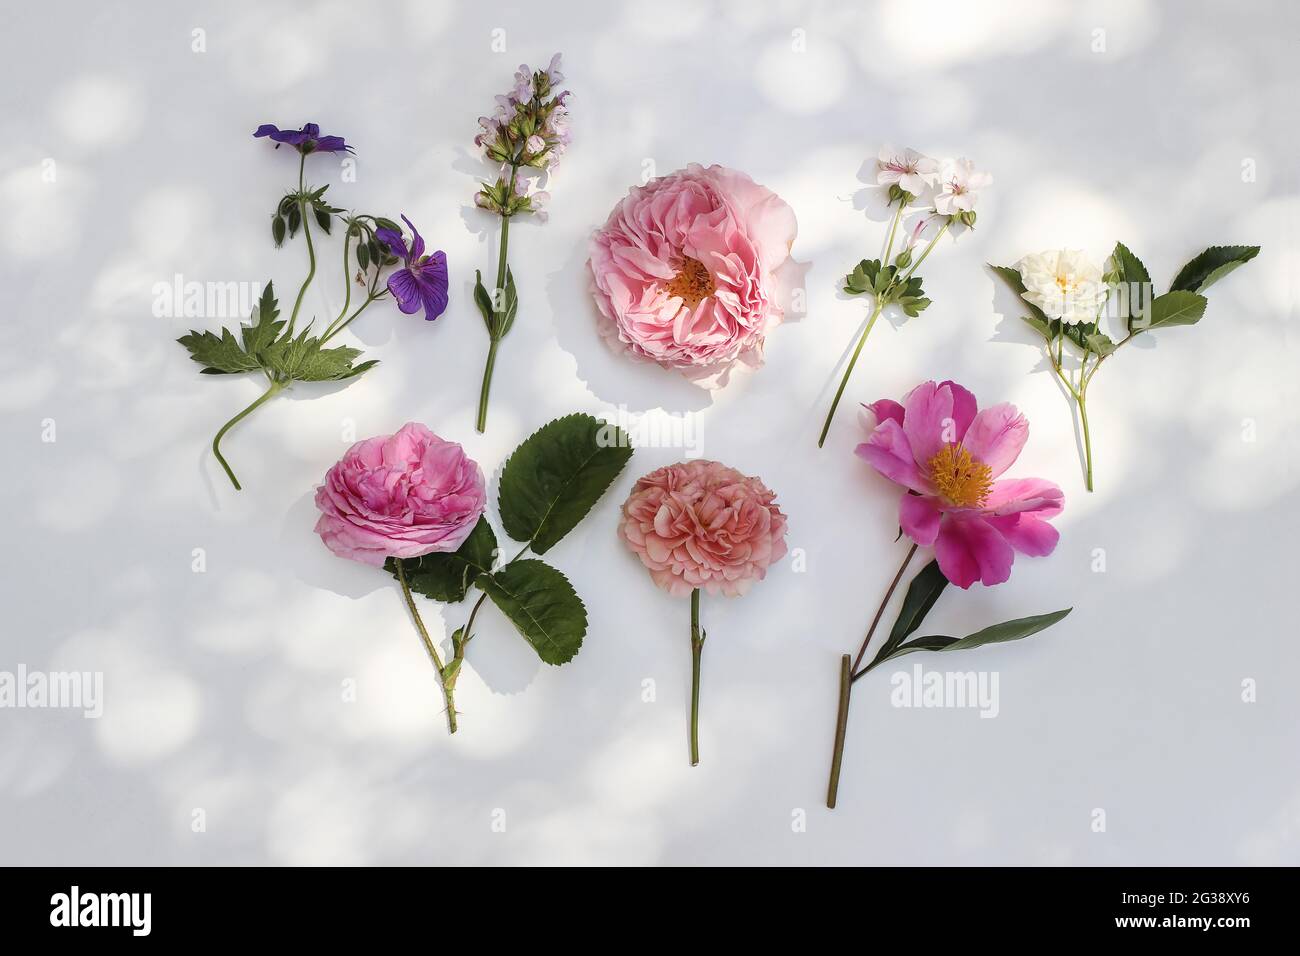 Feminine summer floral composition. Garden flowers and herbs isolated on white table background in sunlight. Colorful roses, sage, peony and geranium Stock Photo